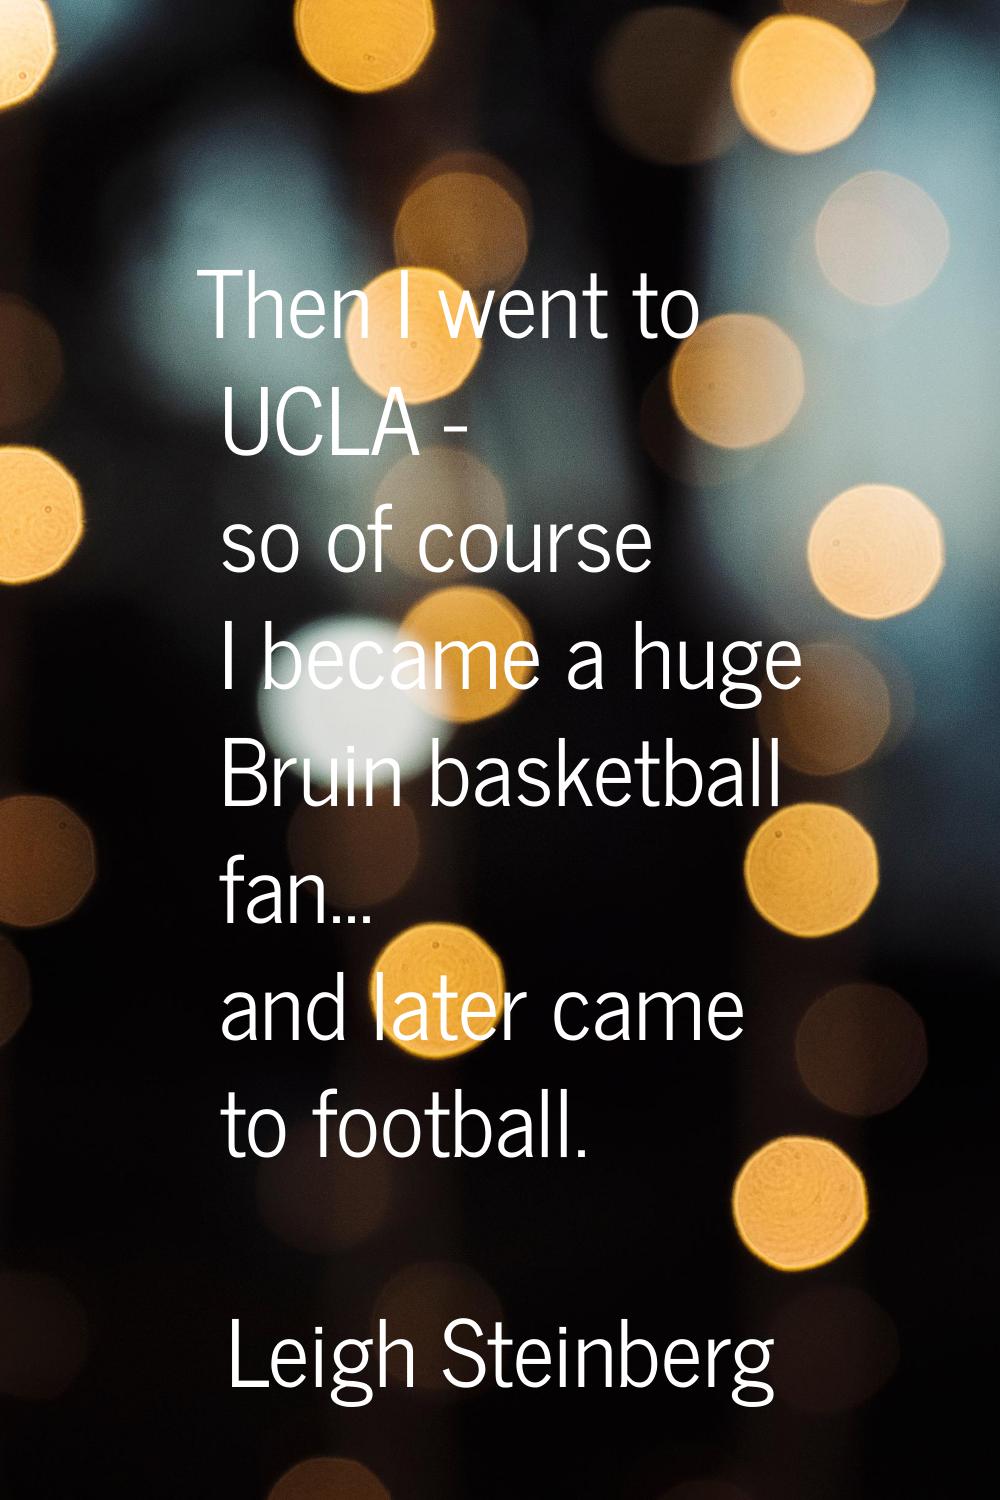 Then I went to UCLA - so of course I became a huge Bruin basketball fan... and later came to footba